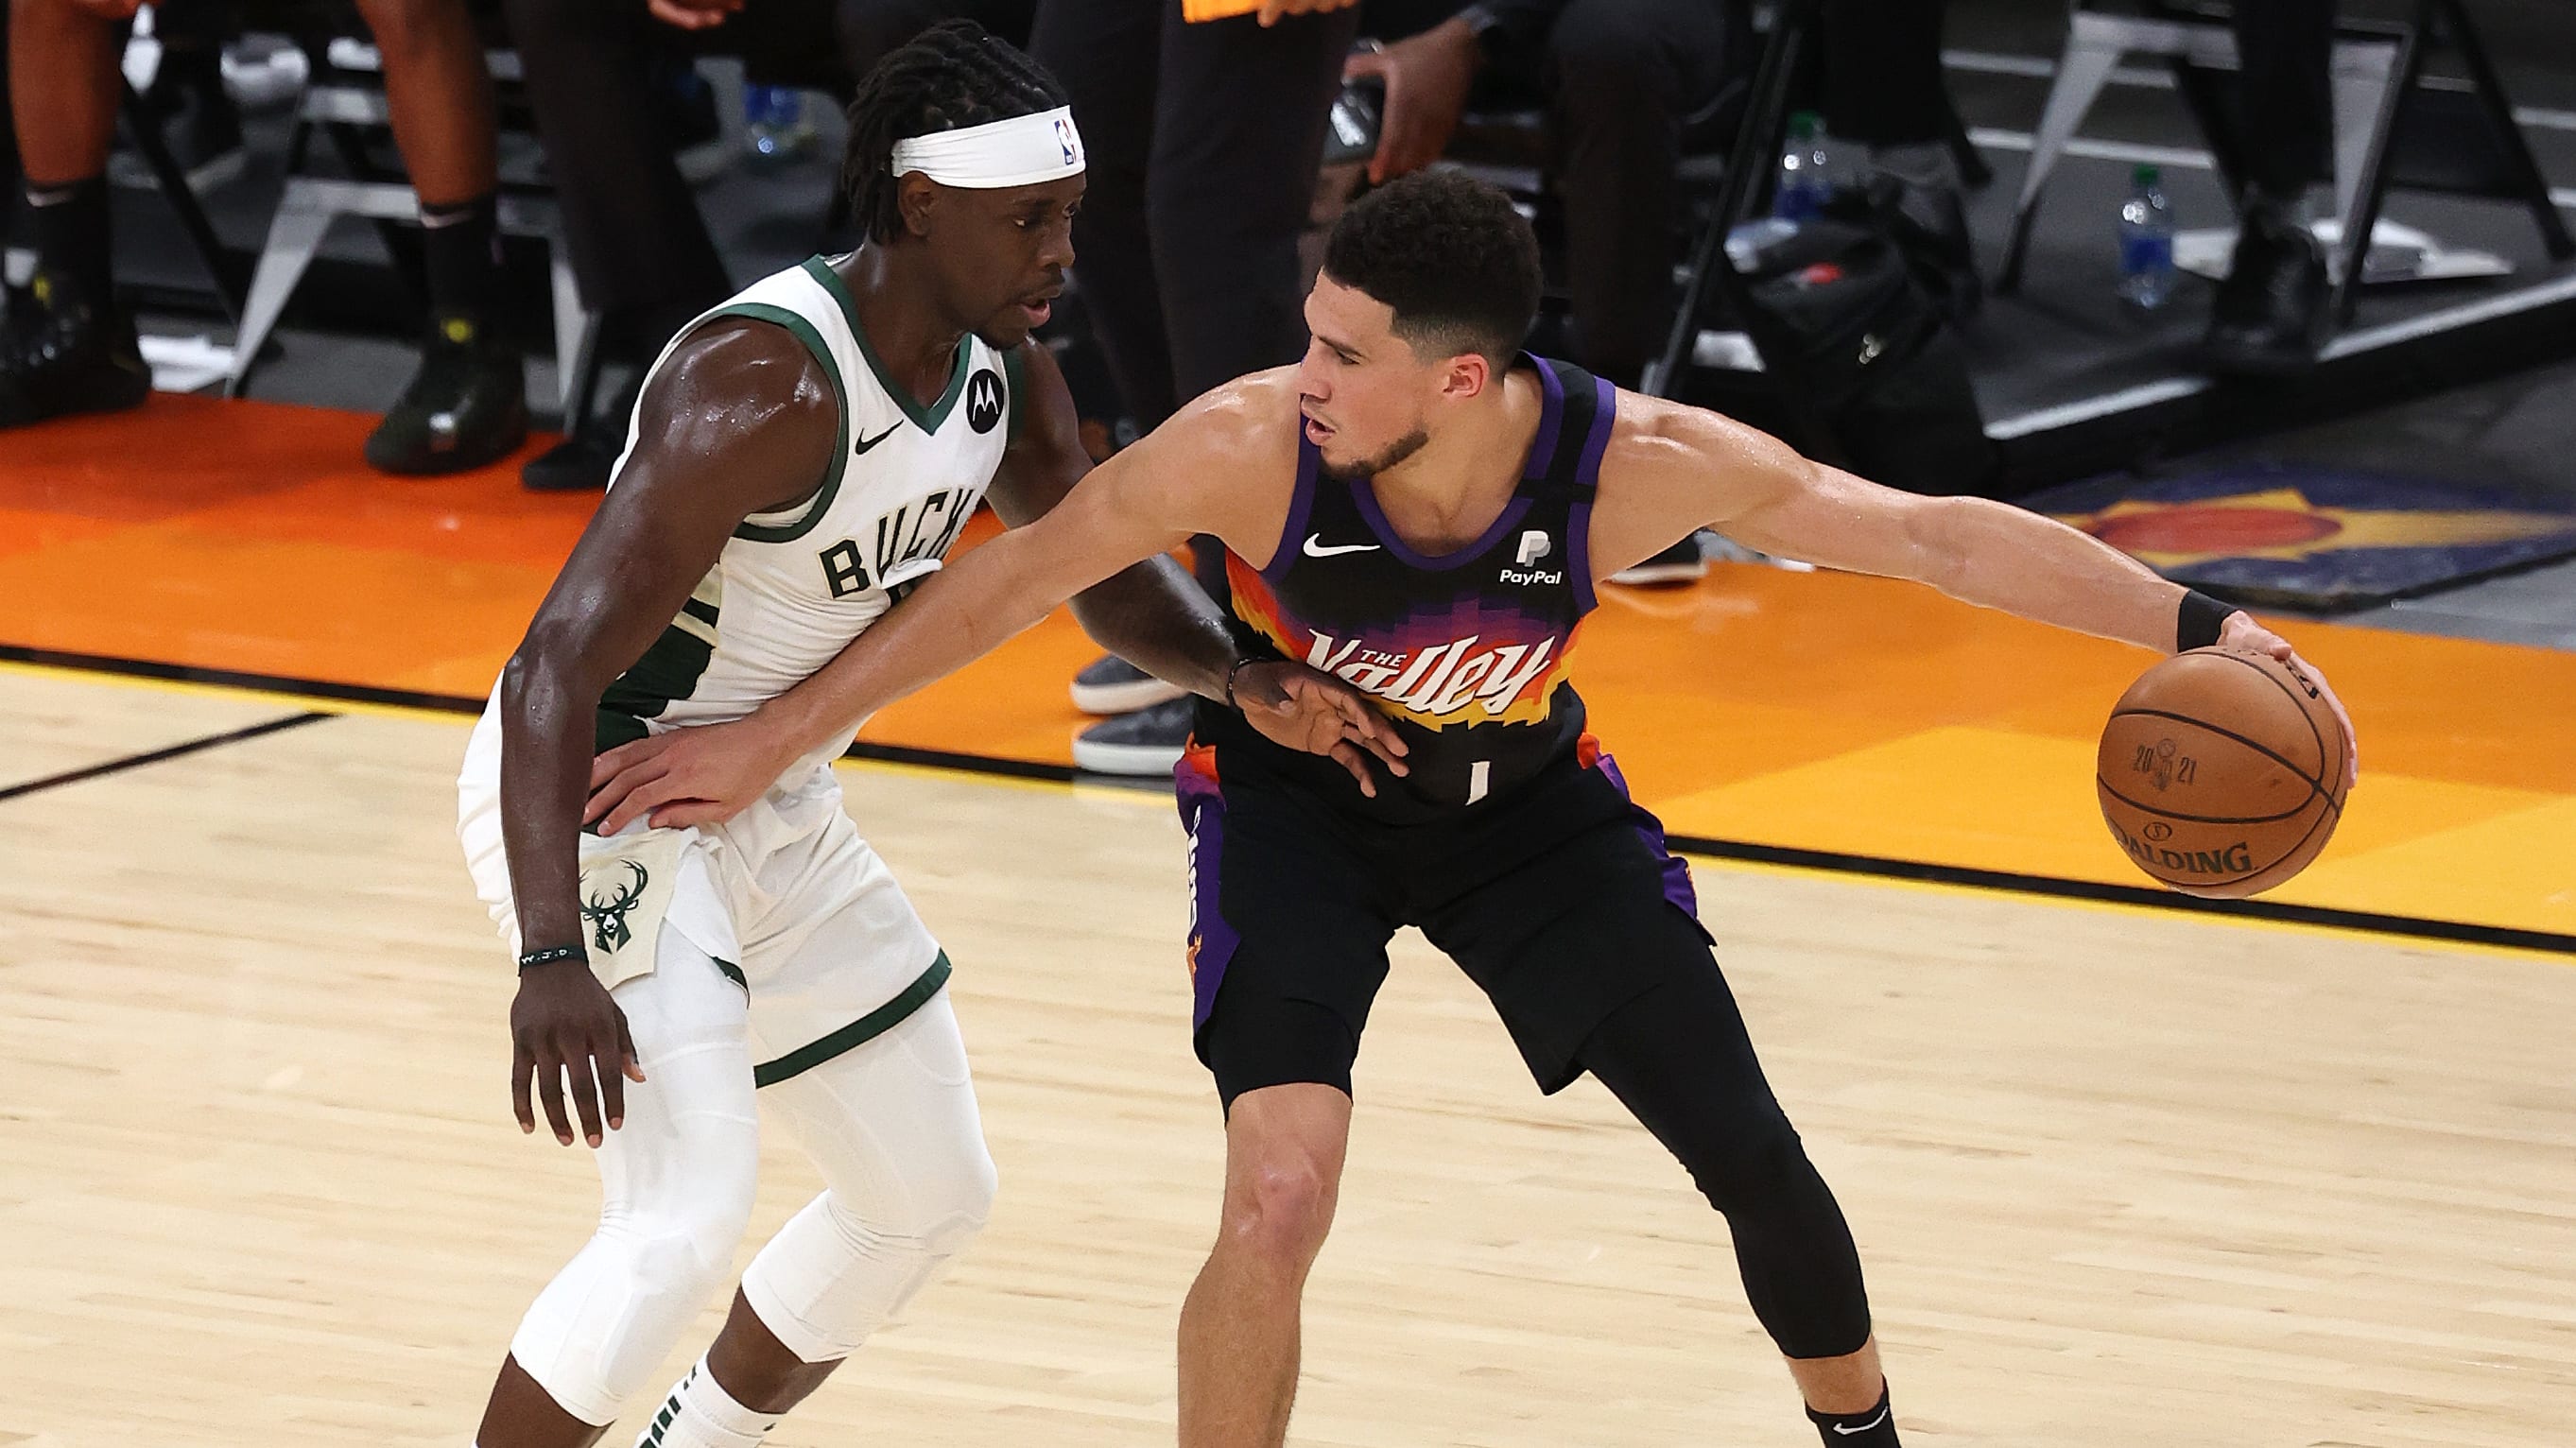 NBA Finals Game 6 Ticket Prices: Seats for Suns at Bucks Cost a Pretty Penny